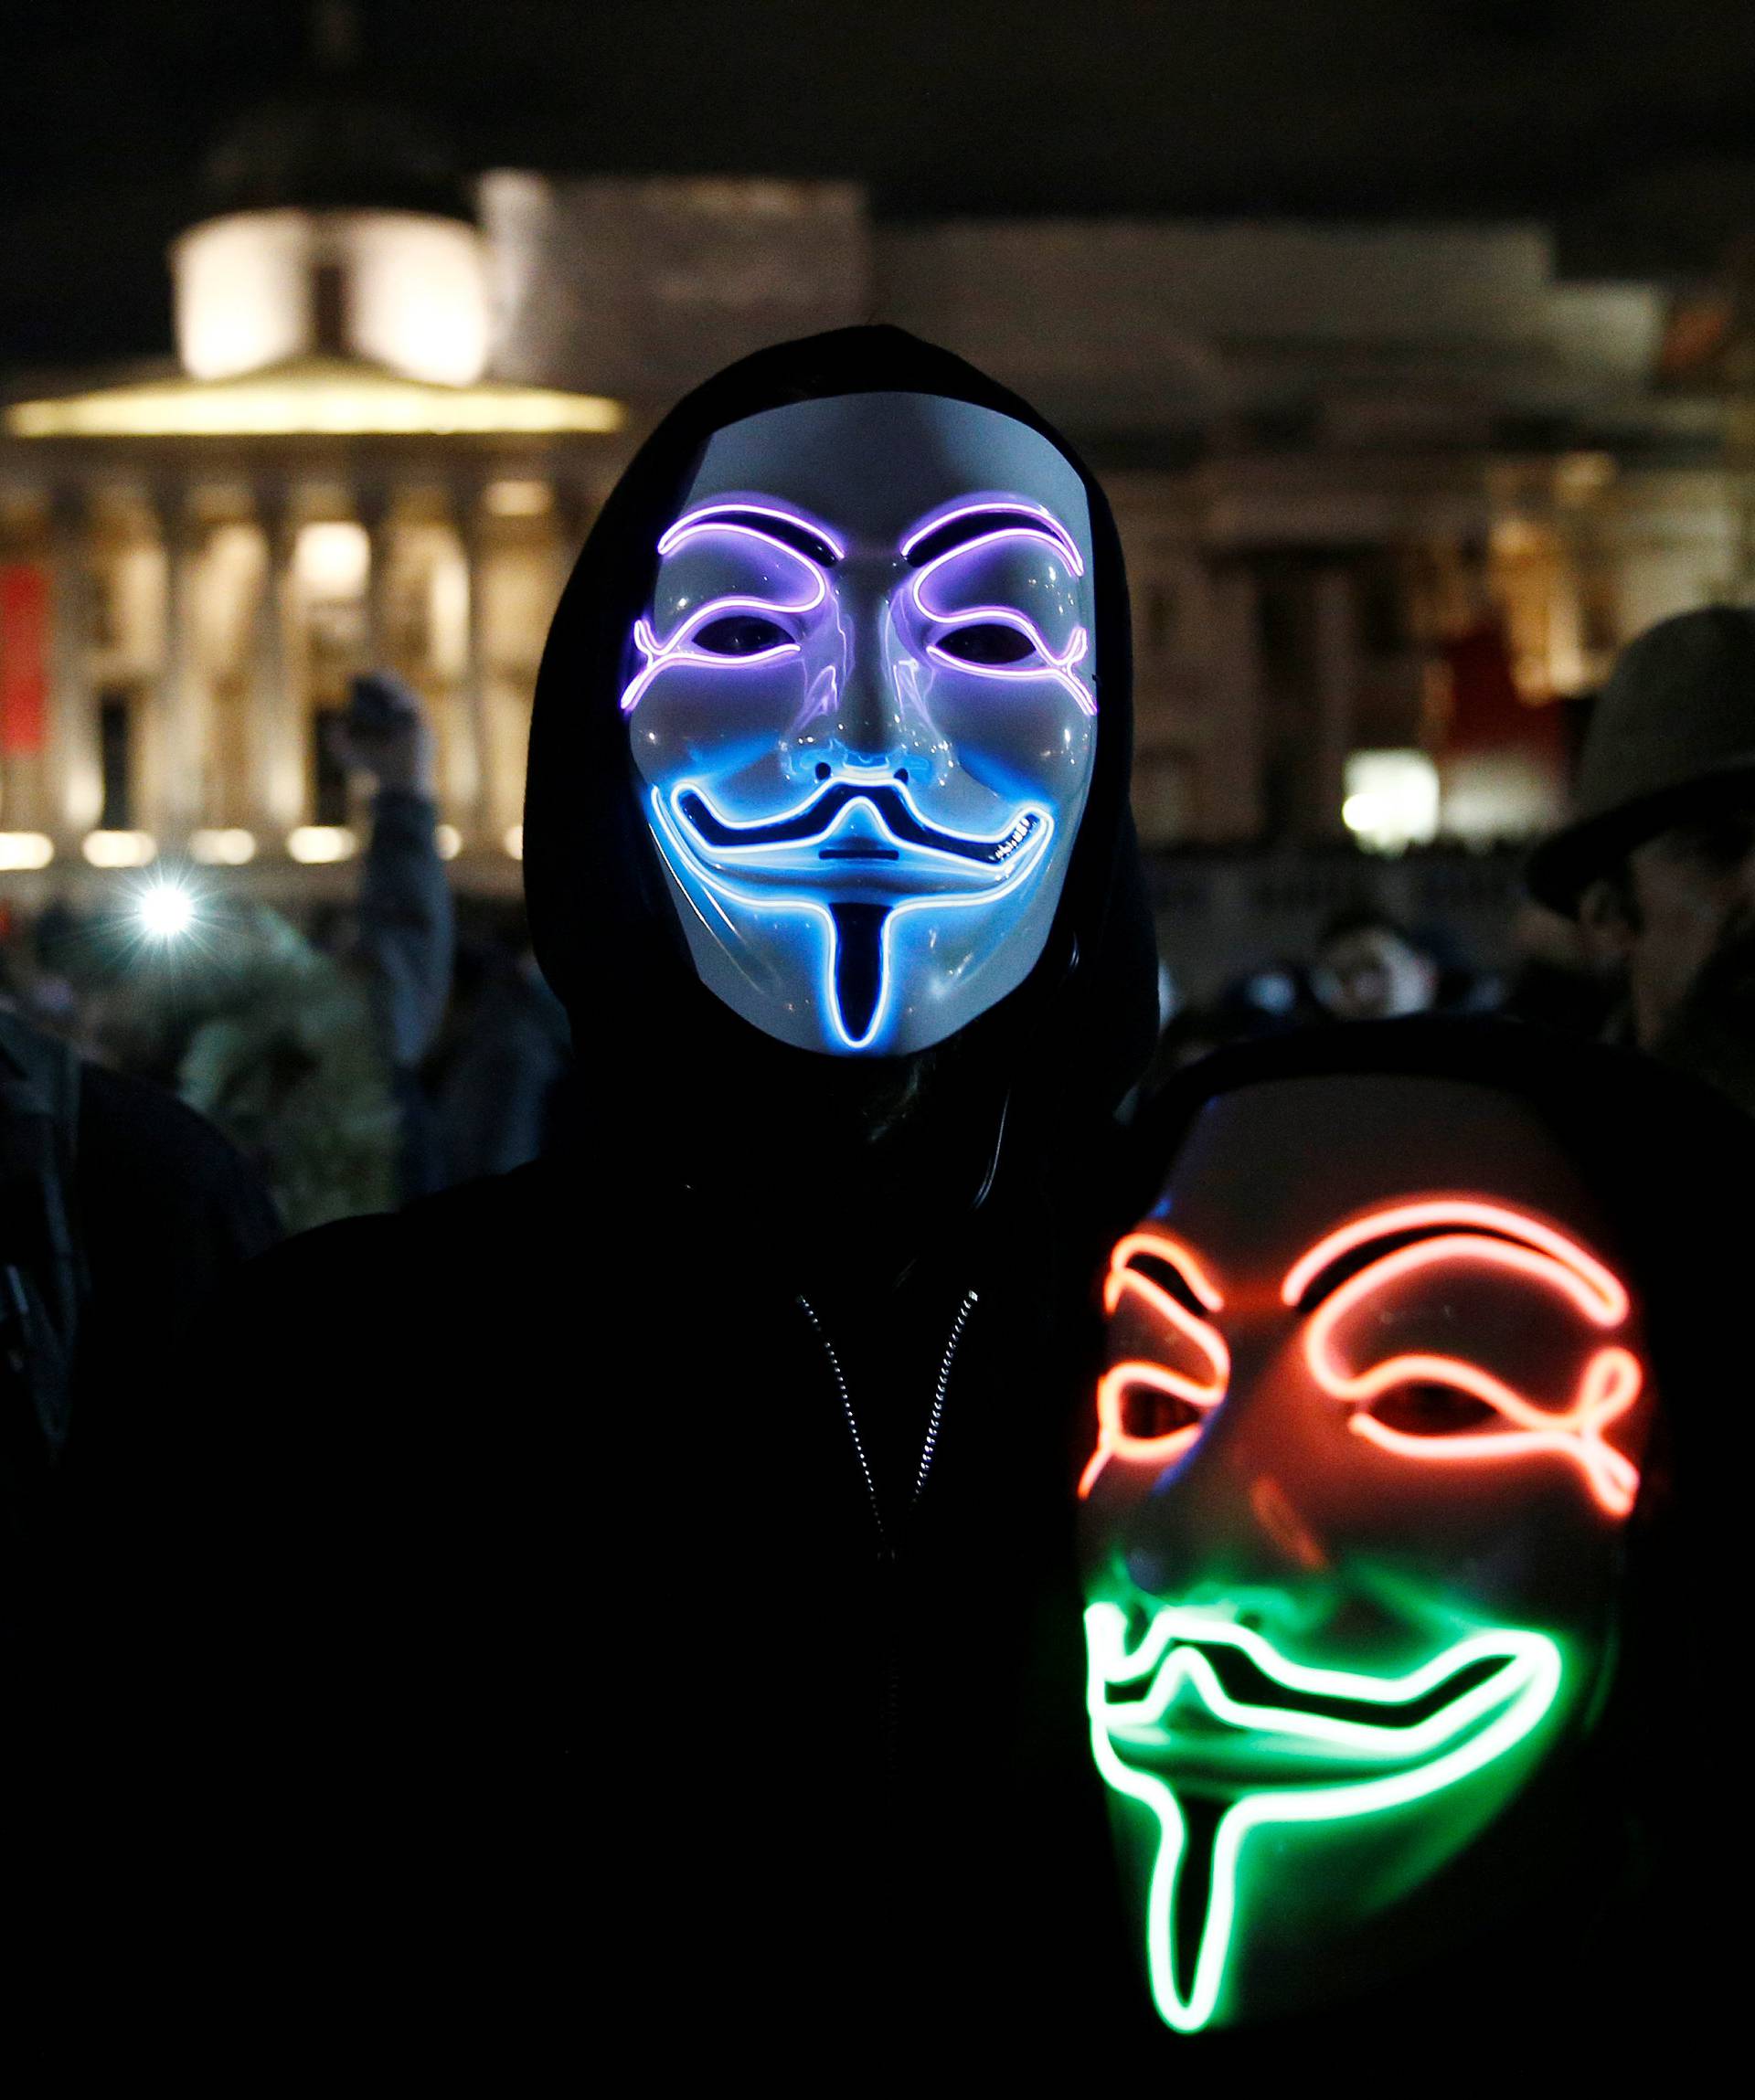 Mask wearing protesters gather before the "Million Mask March" in London